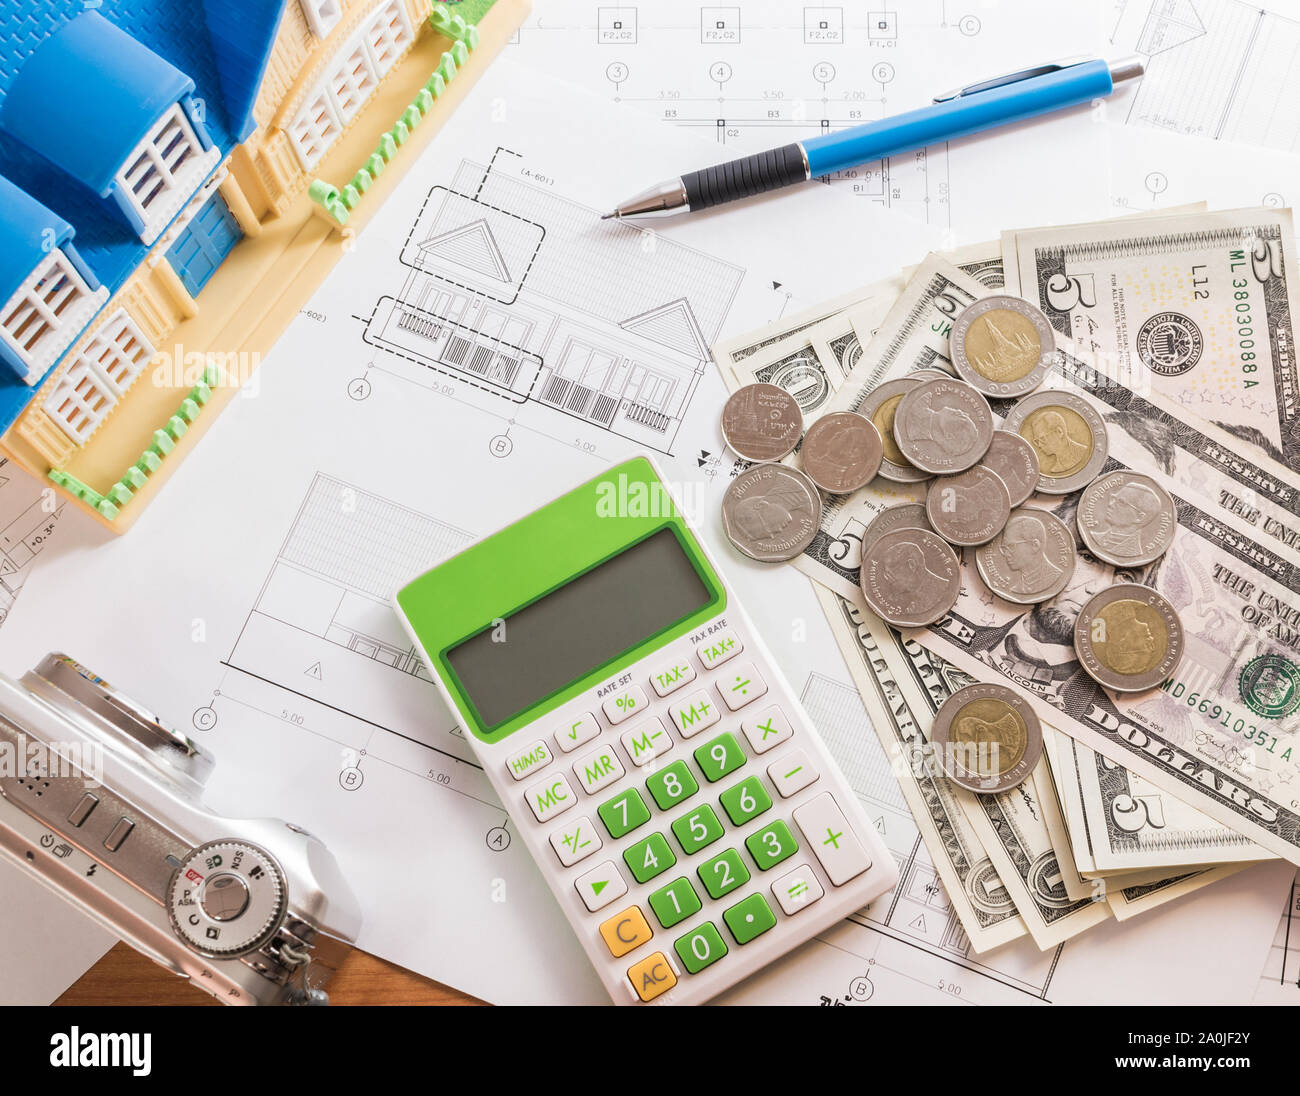 Investment for construction with limit budget, Construction plan, pen, money, model house, camera and calculator on wooden table Stock Photo